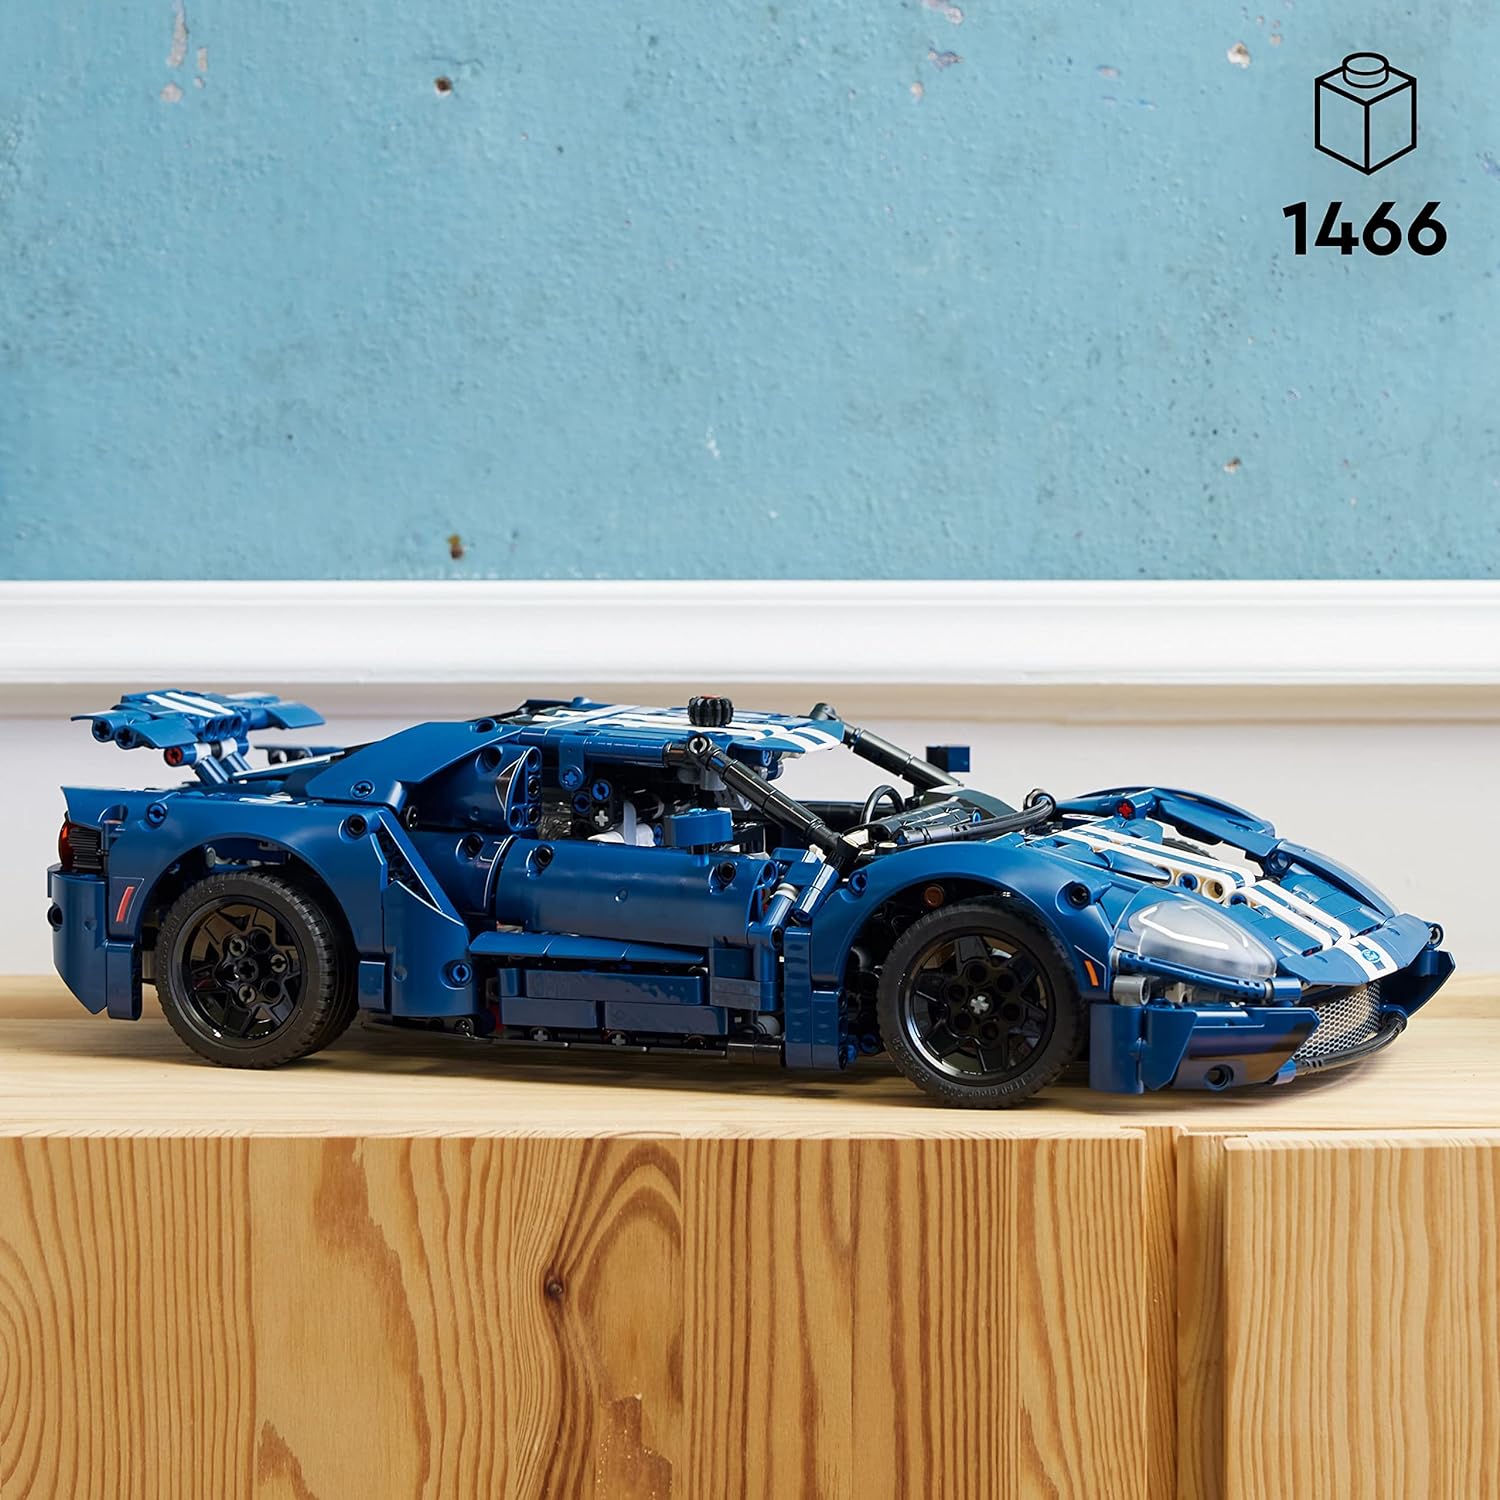 LEGO 42154 Technic Ford GT Car Model Kit for Adults to Build, Collectible Set, 1:12 Scale Supercar with Authentic Features, Gift Idea That Fuels Creativity and Imagination